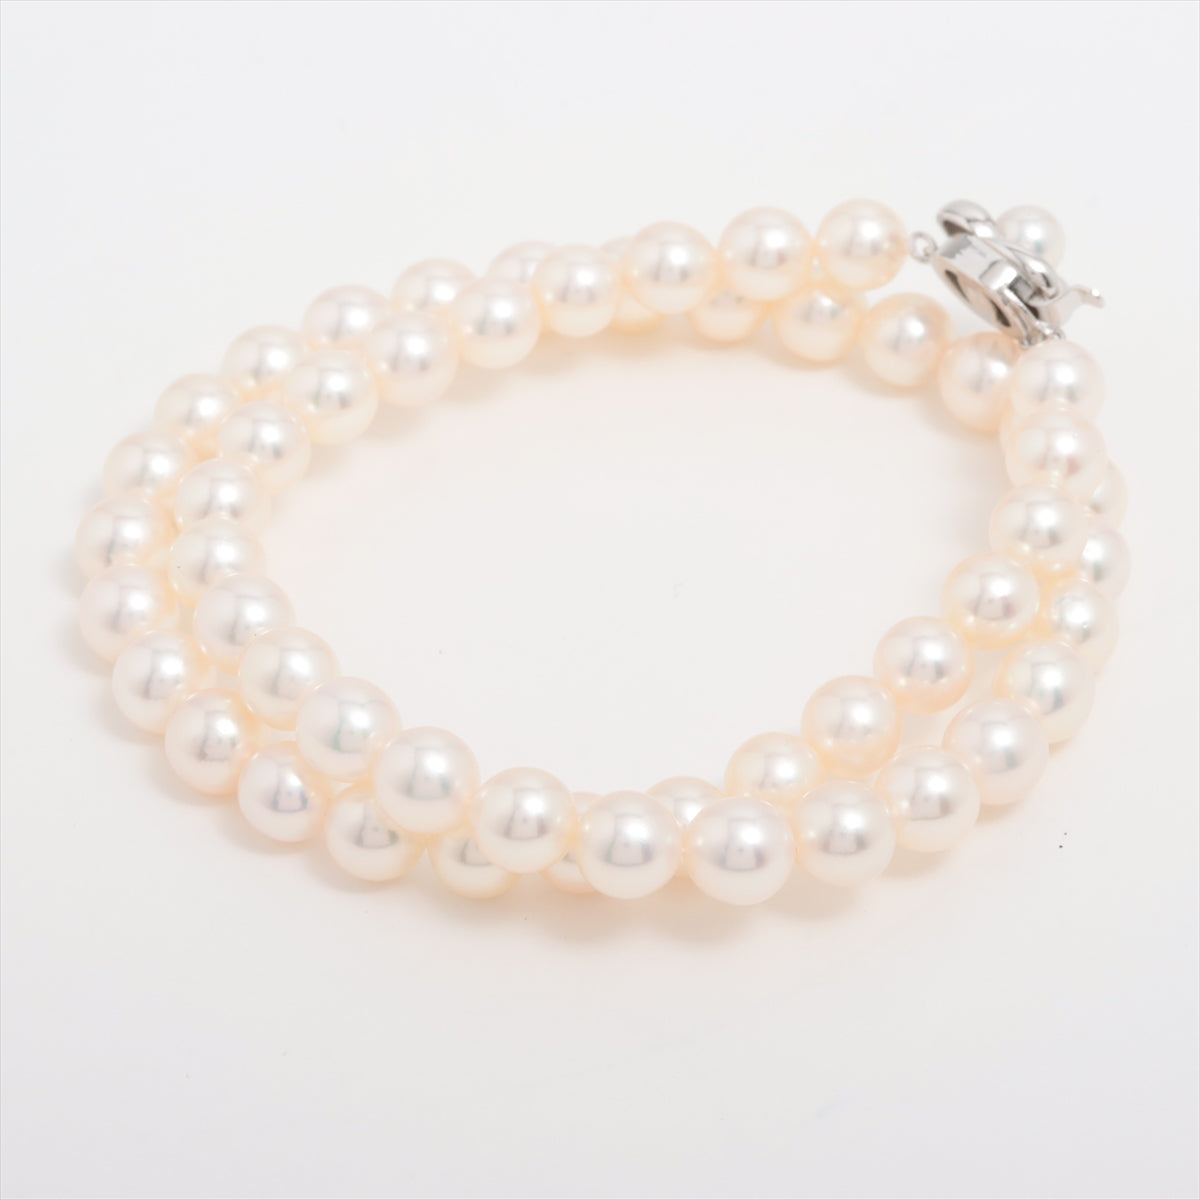 TASAKI Pearl Necklace SV Total 37.9g Approx. 7.5mm-8.0mm Pearl degradation